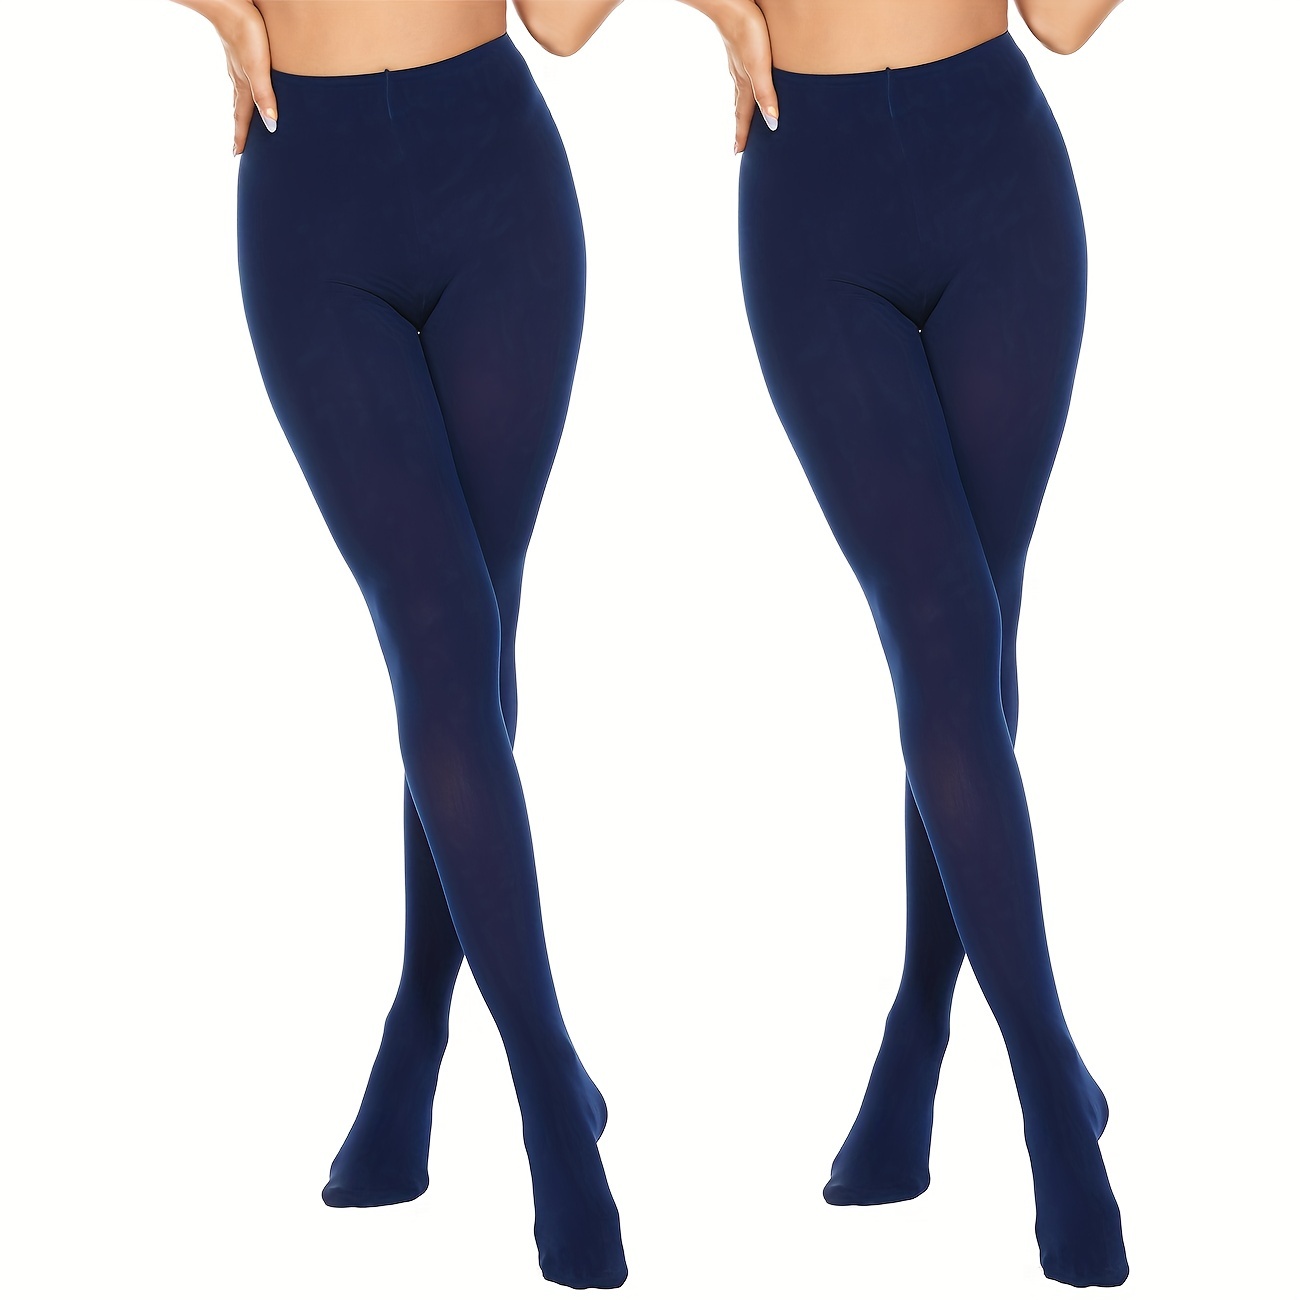 Women's Navy Blue Polyester Solid Tights